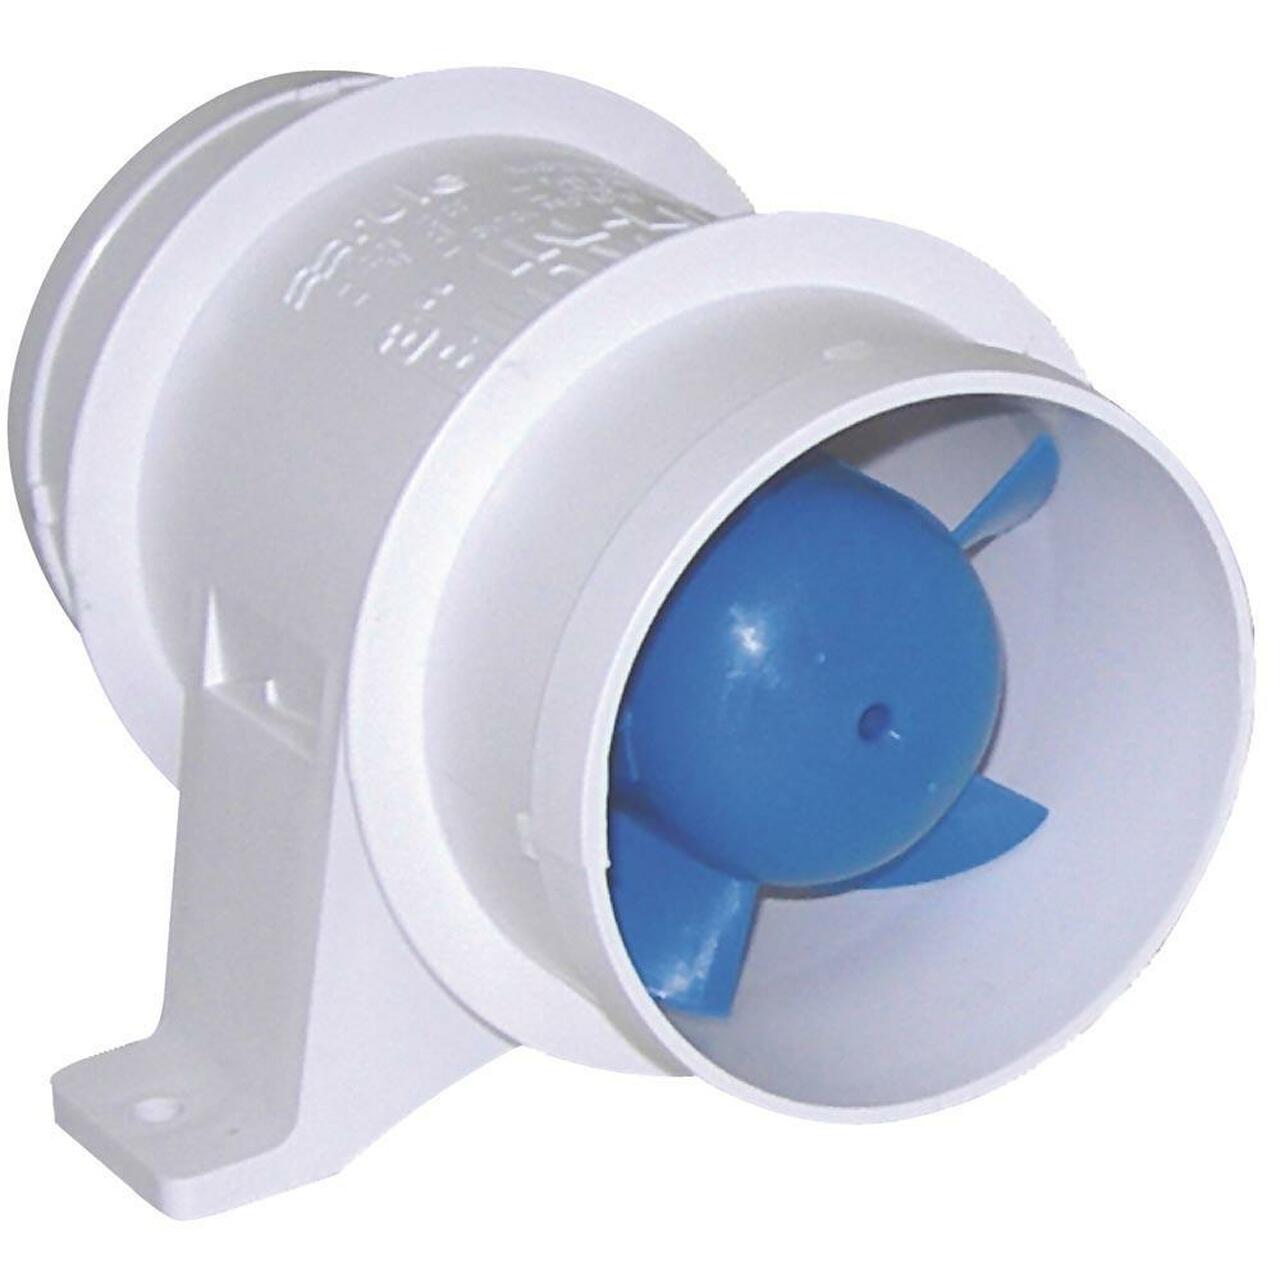 Rule - In-Line Blowers, Part No. 140-24V - CFM 135 - Volts 24 DC - Size 3